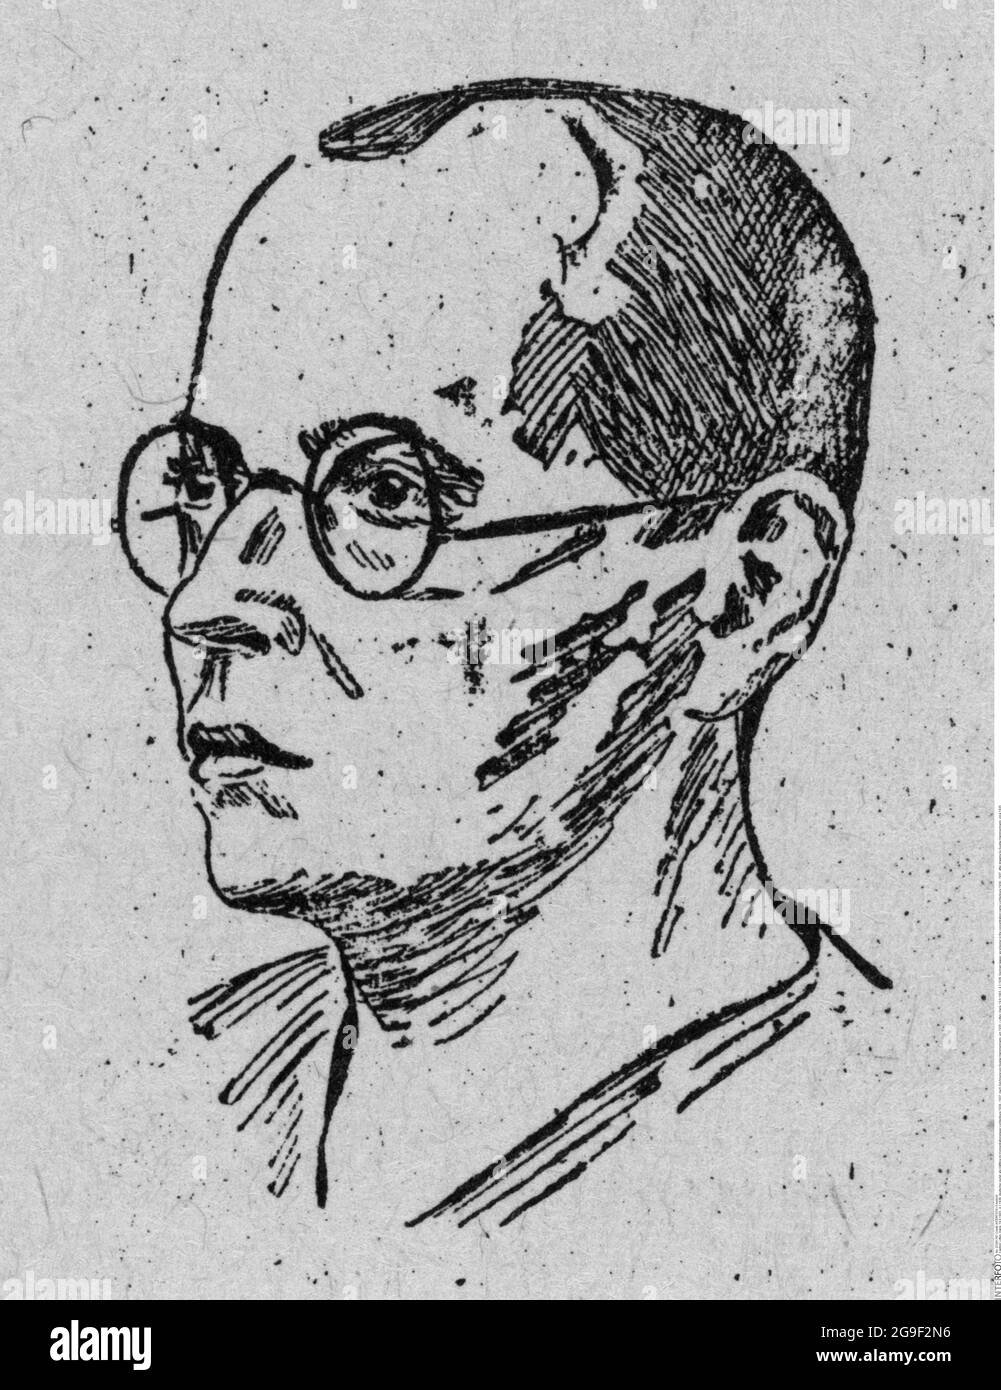 Litten, Hans, 19.6.1903 - 4.2.1938, German lawyer, as prisoner in the concentration camp Lichtenburg 1934 - 1937, EDITORIAL-USE-ONLY Stock Photo